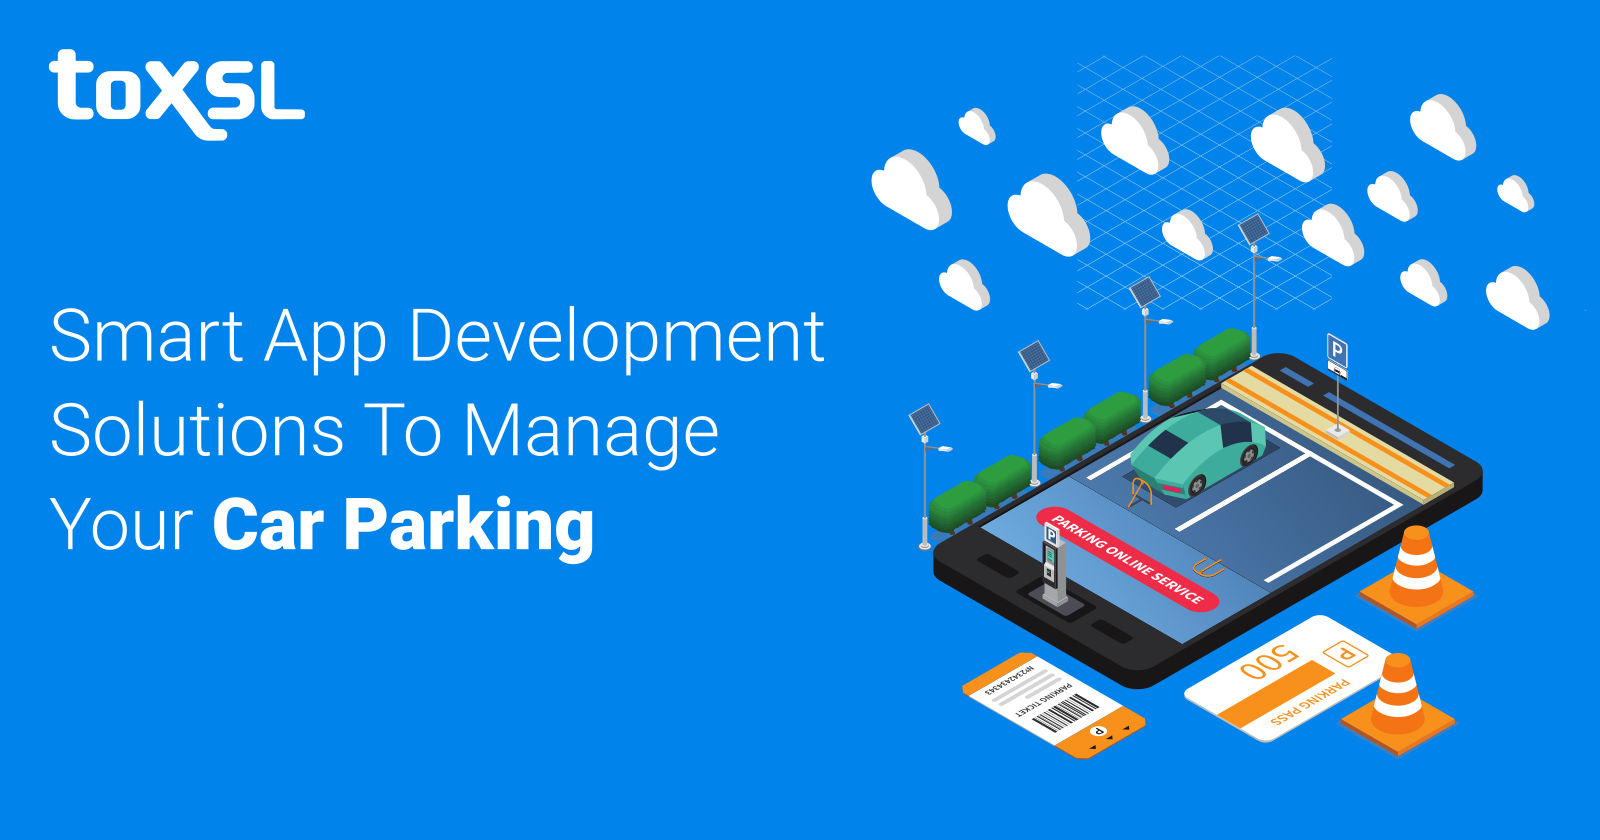 Smart App Development Solutions To Manage Your Car Parking